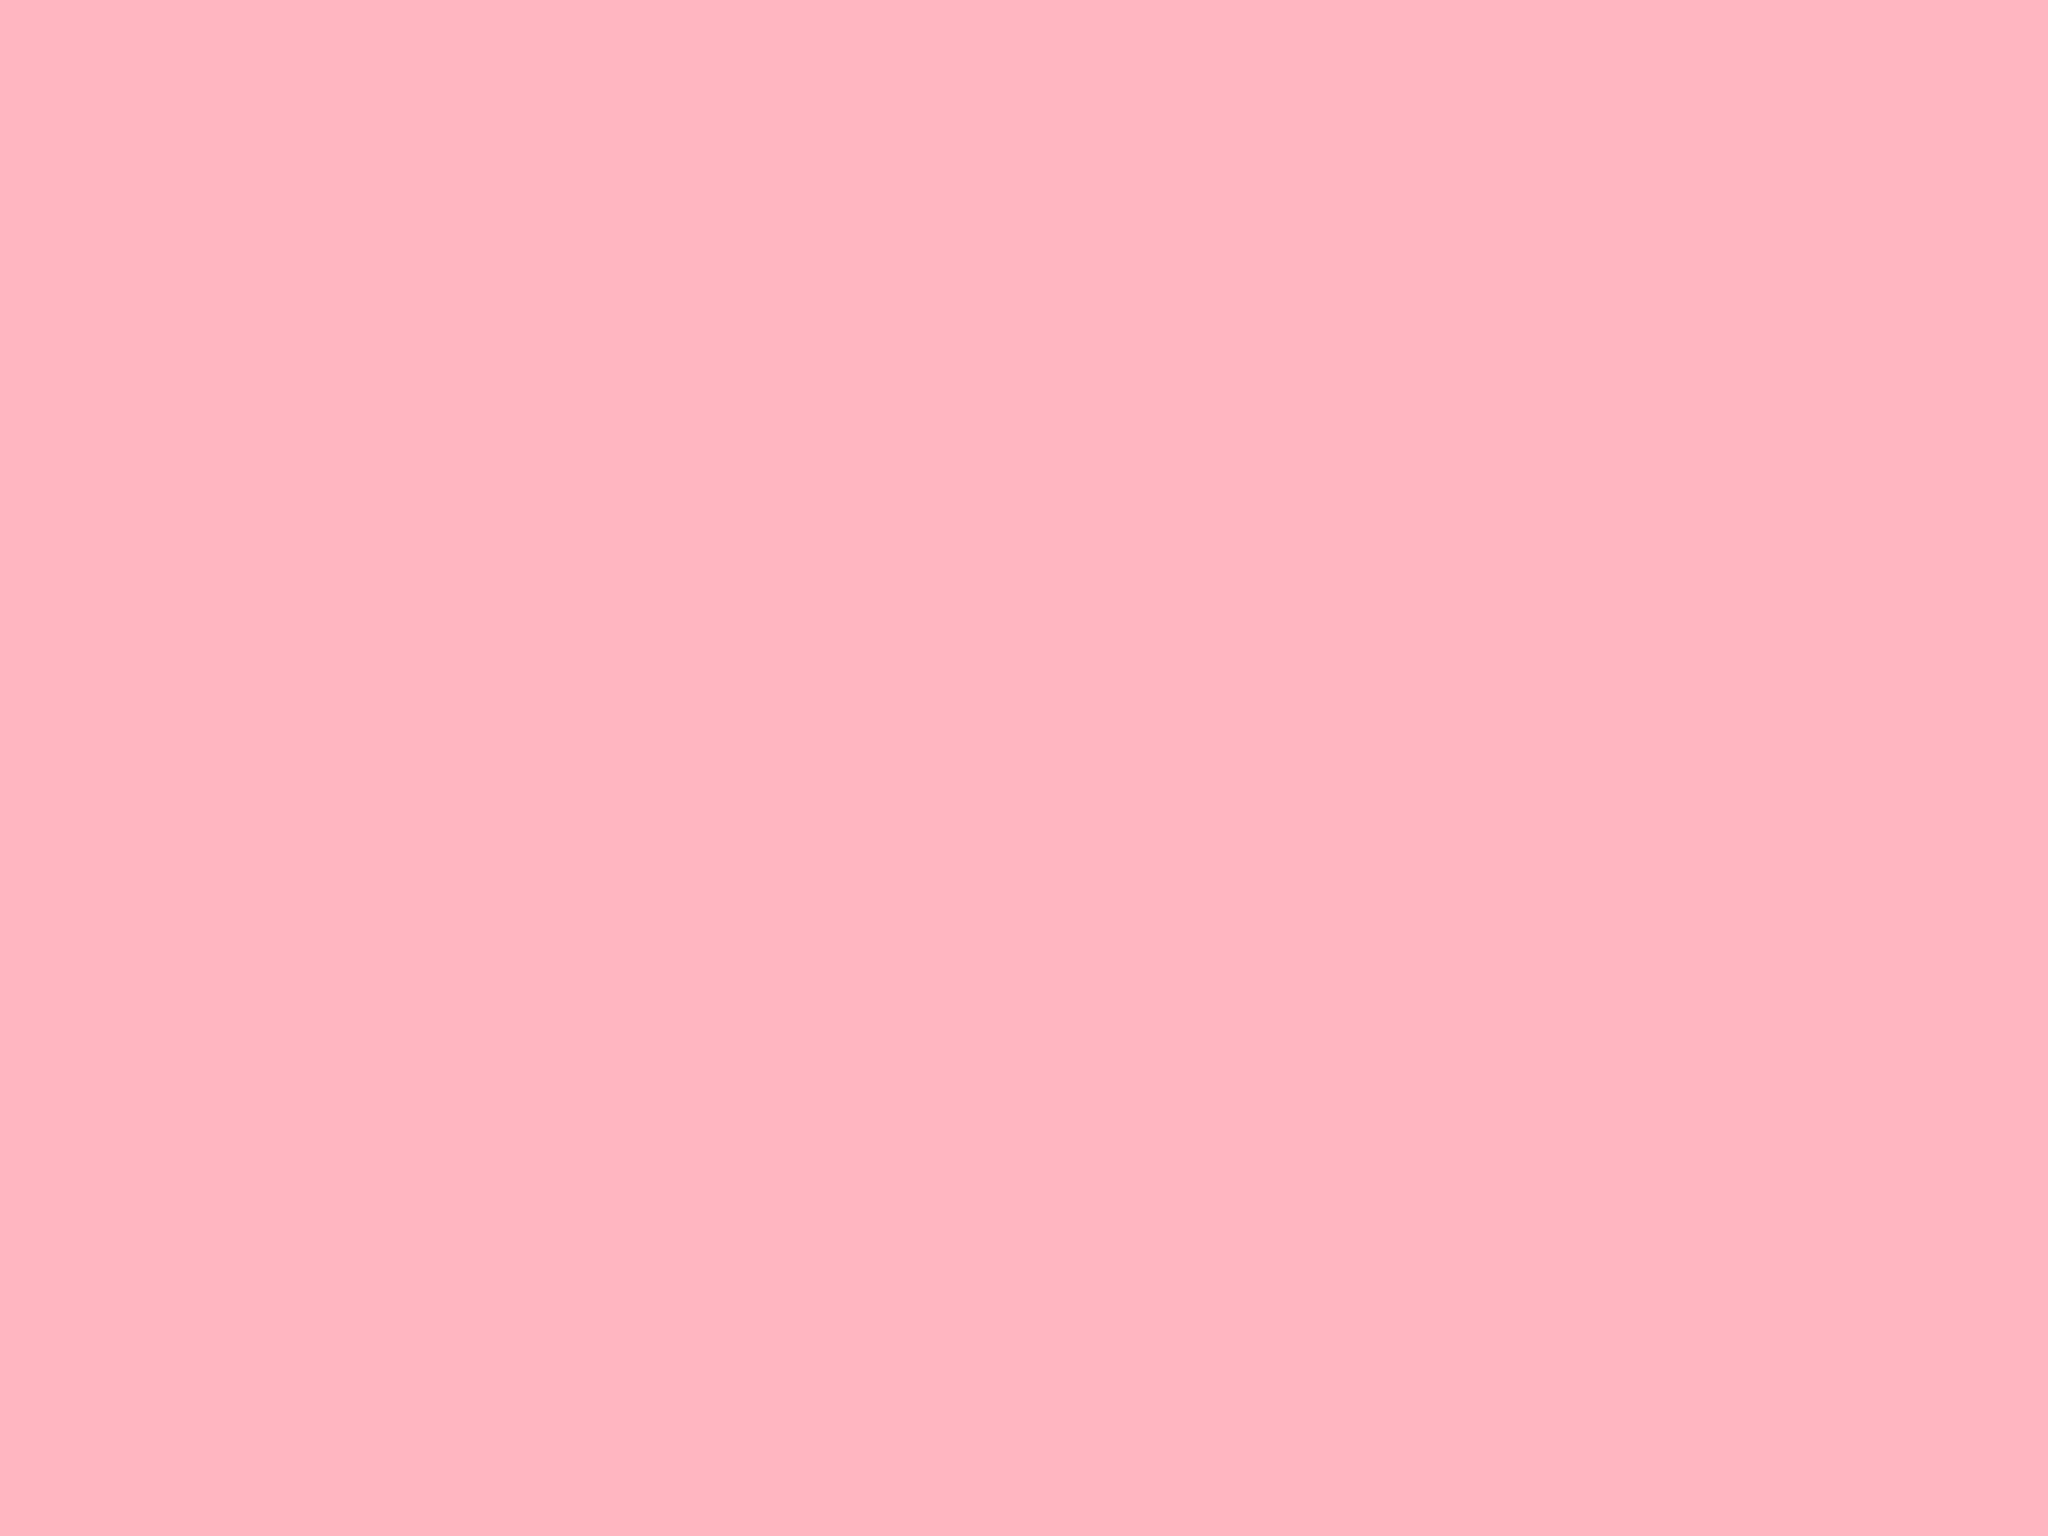 Solid Pale Pink 2048x1536 Light Pink Solid Clipart